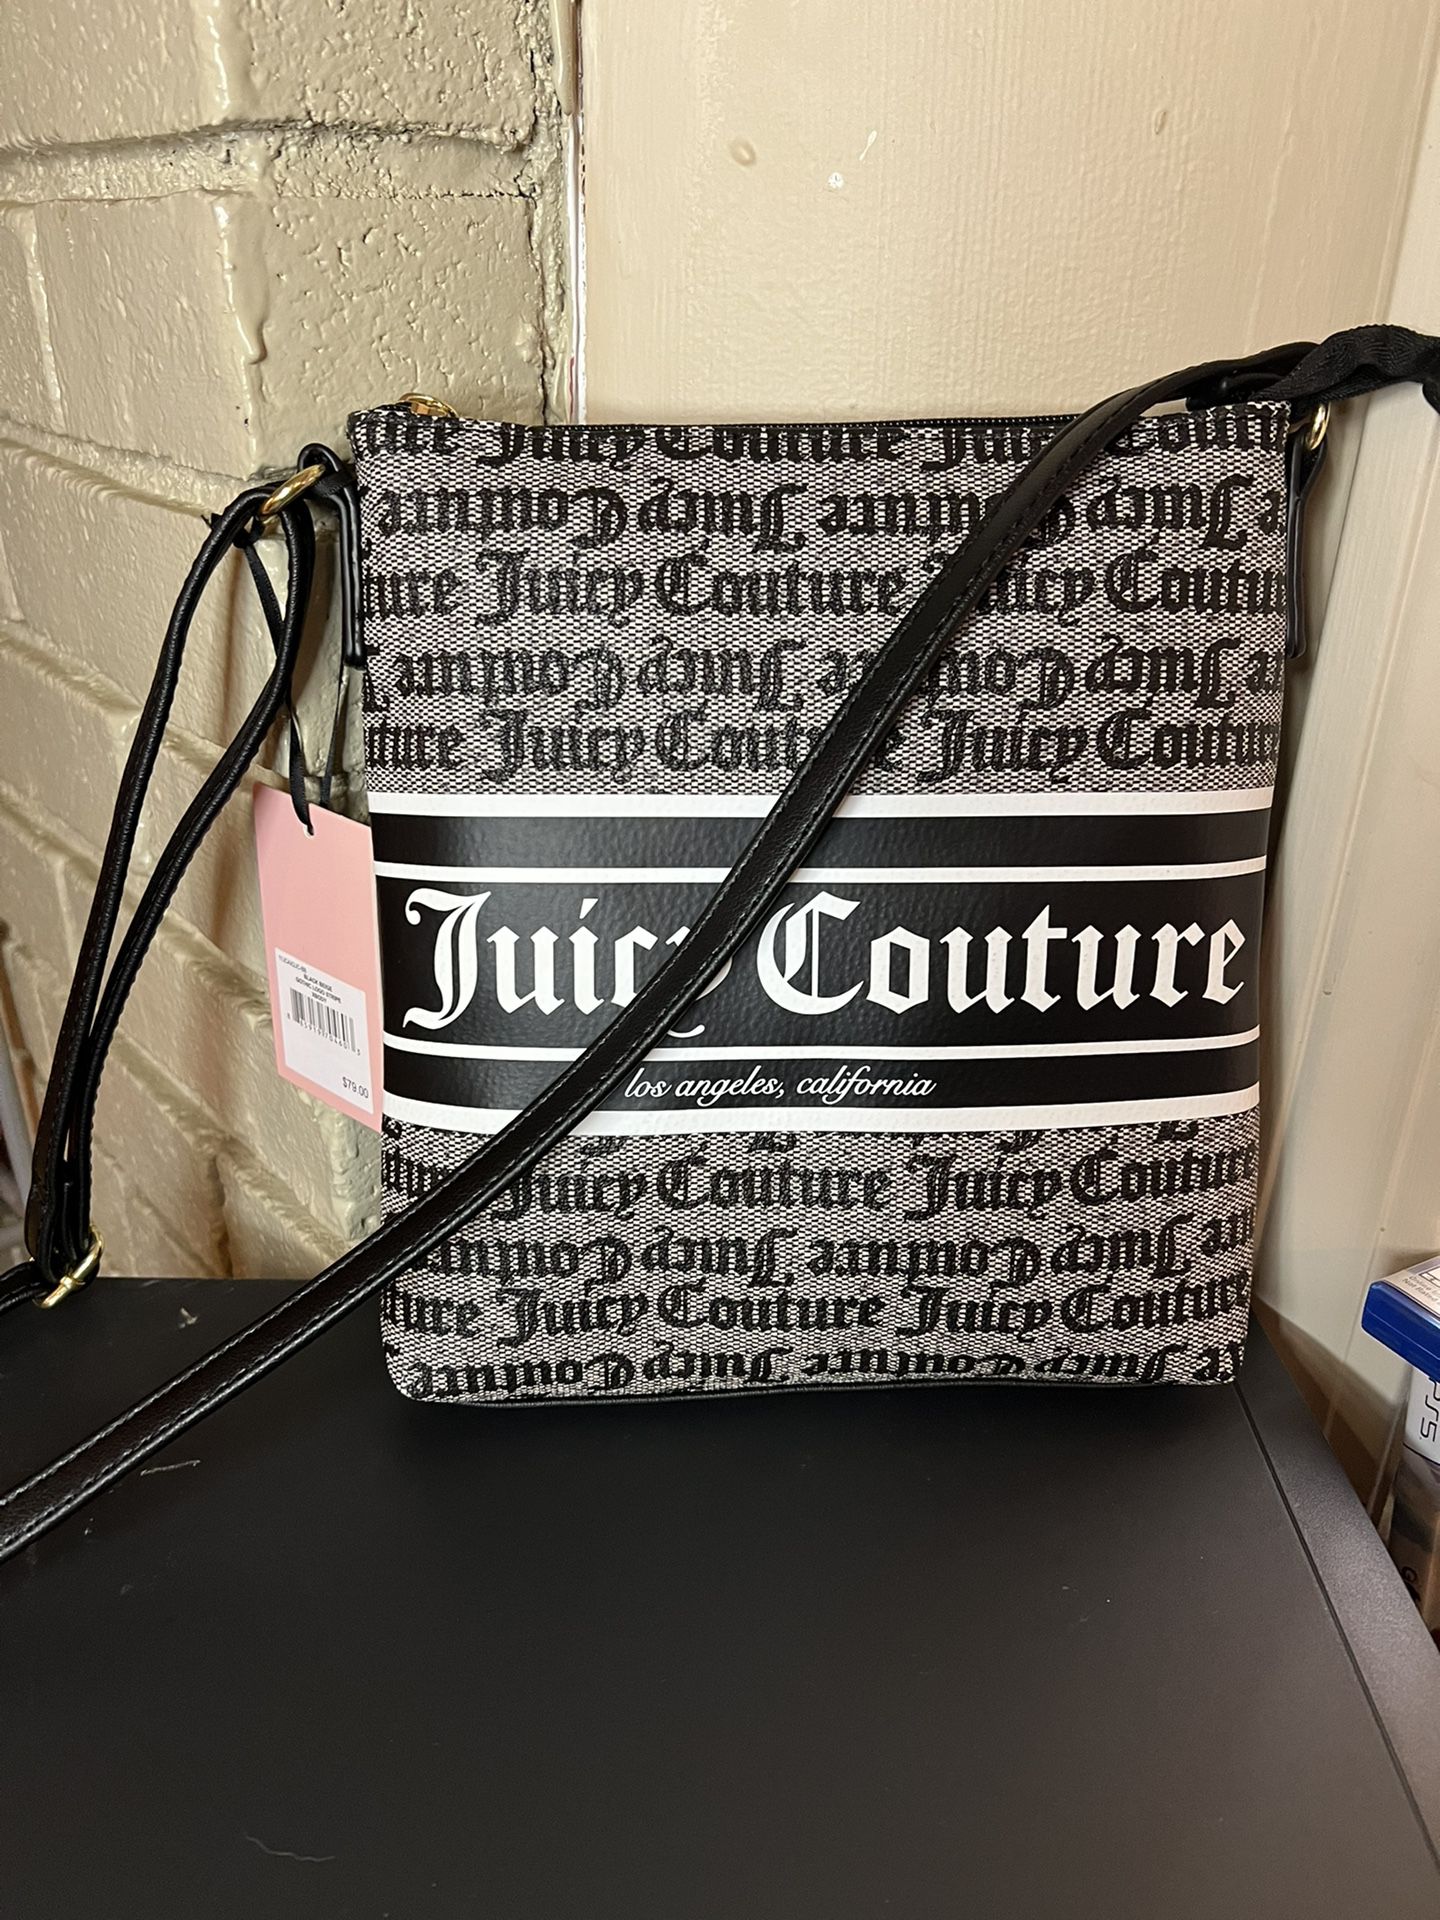 2 Juicy Couture Bags New!!!!